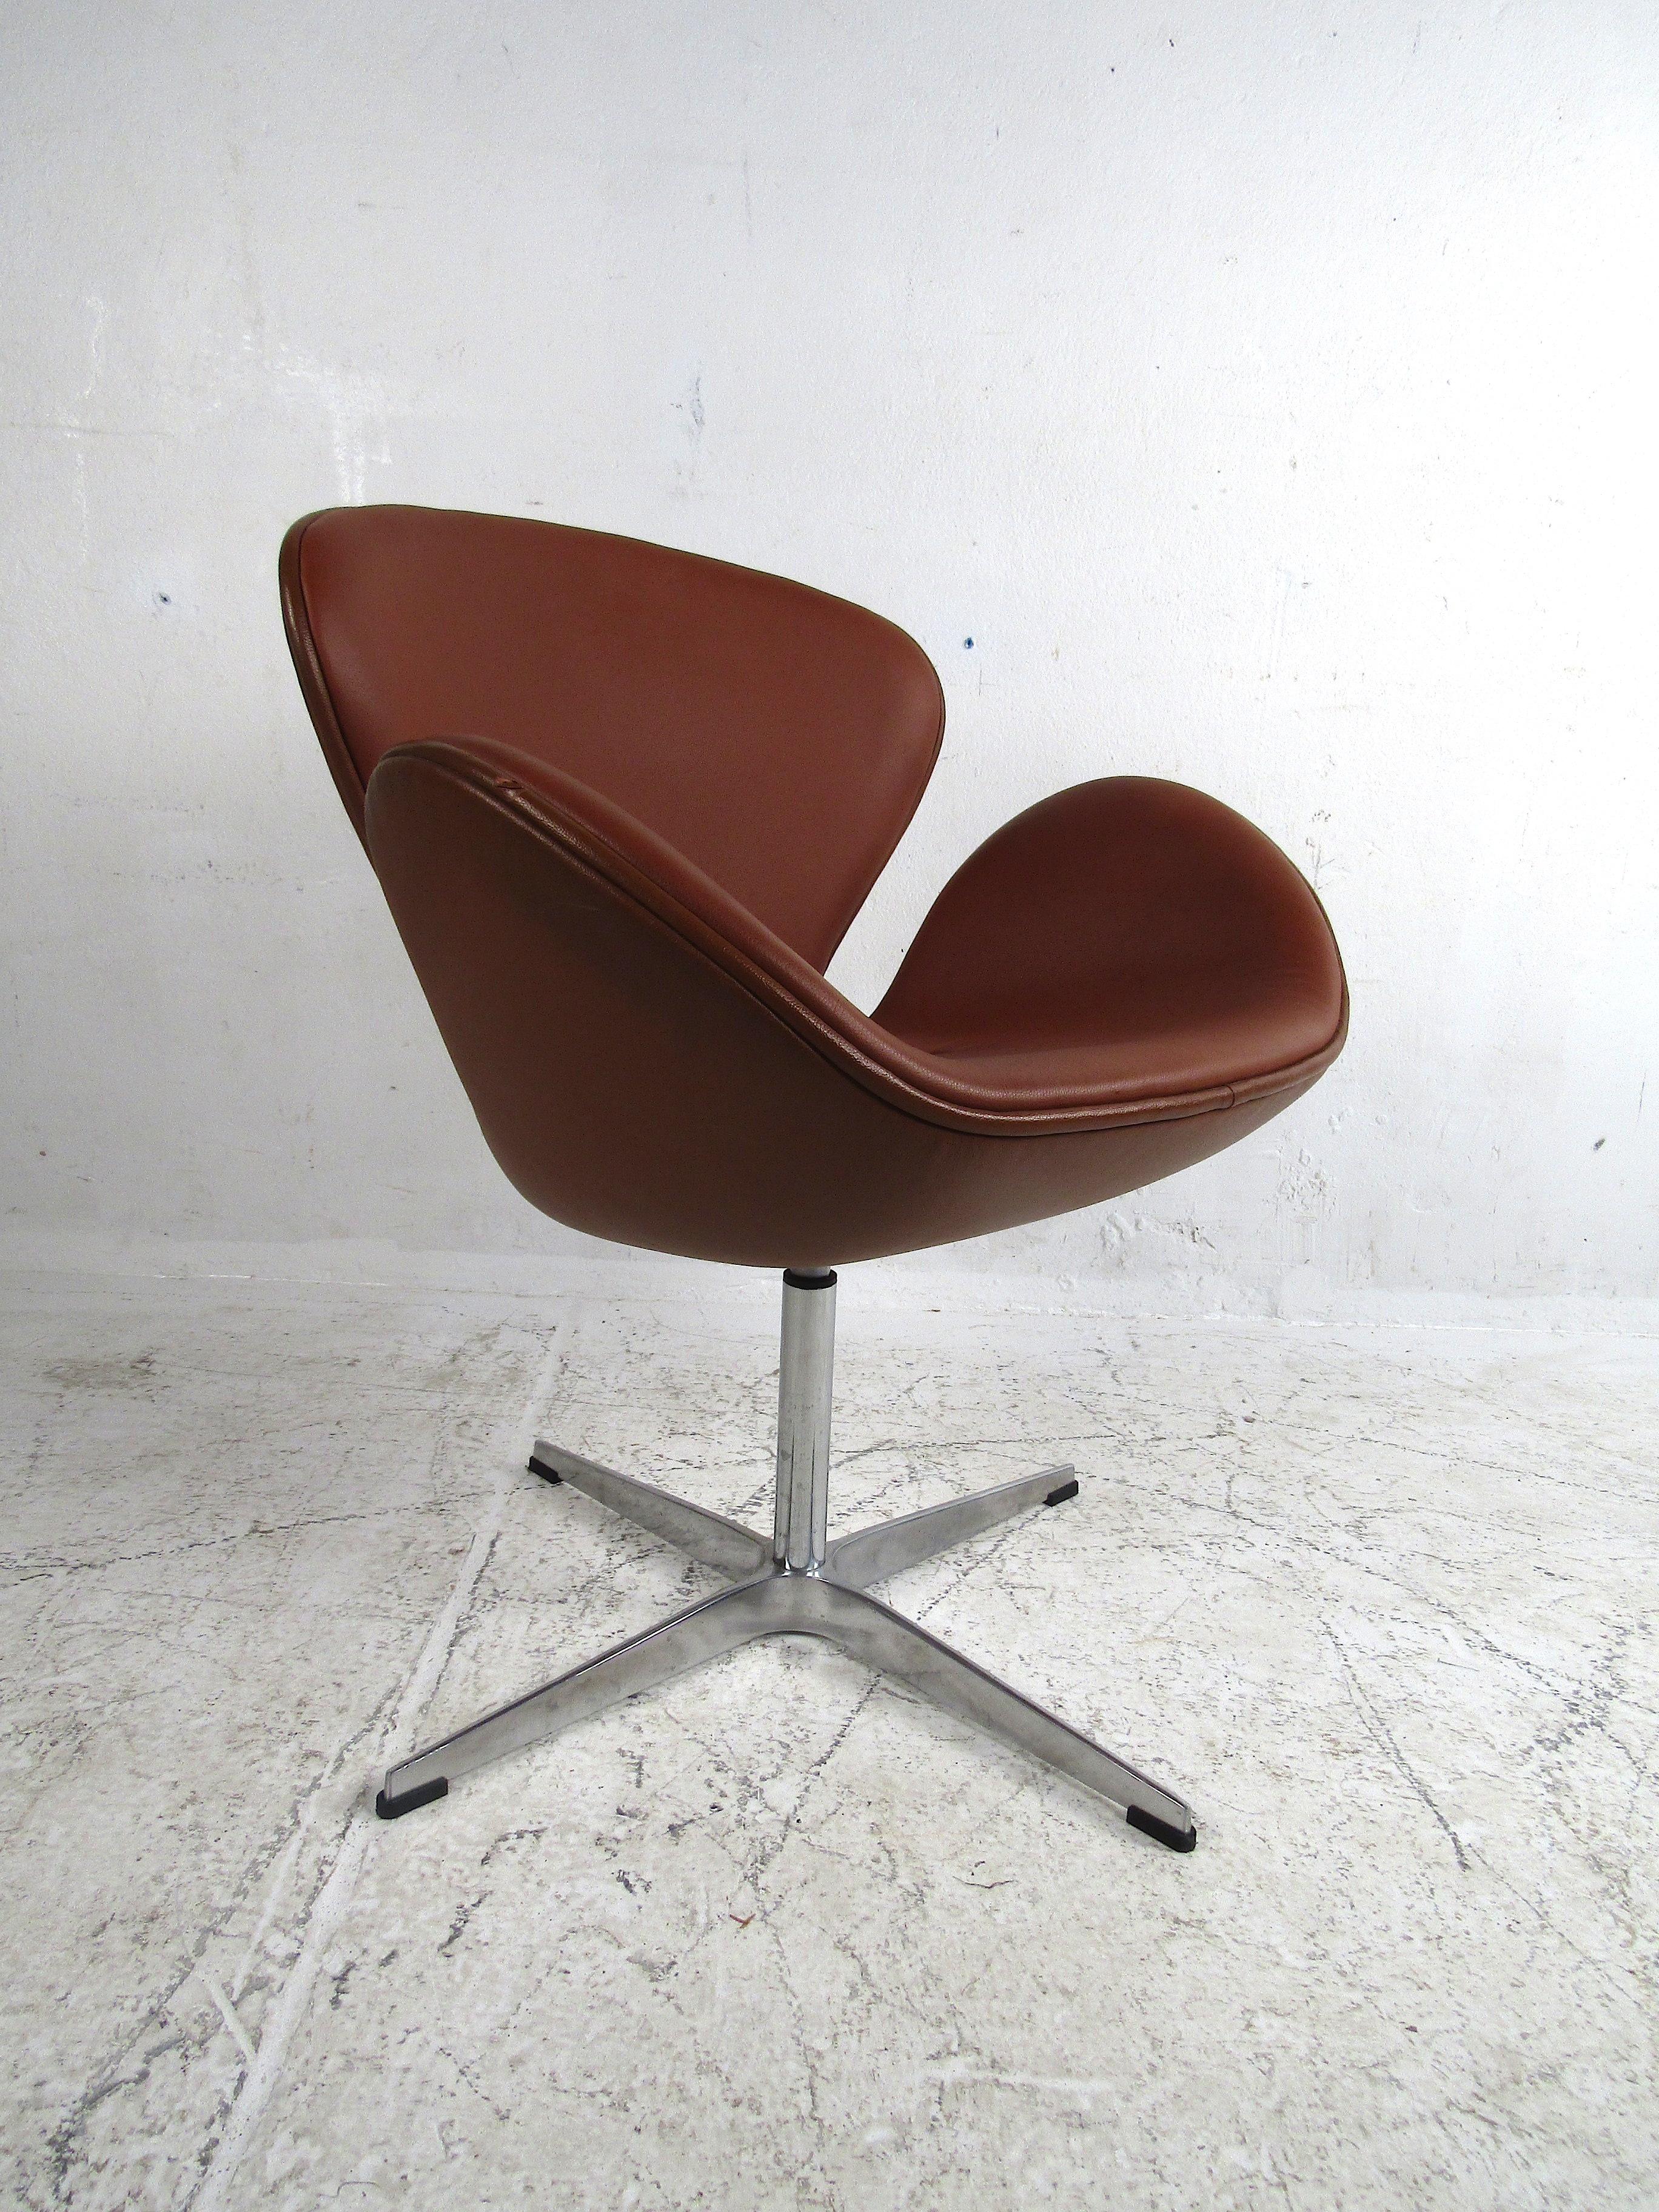 Midcentury Swiveling Swan Chair after Arne Jacobsen In Distressed Condition For Sale In Brooklyn, NY